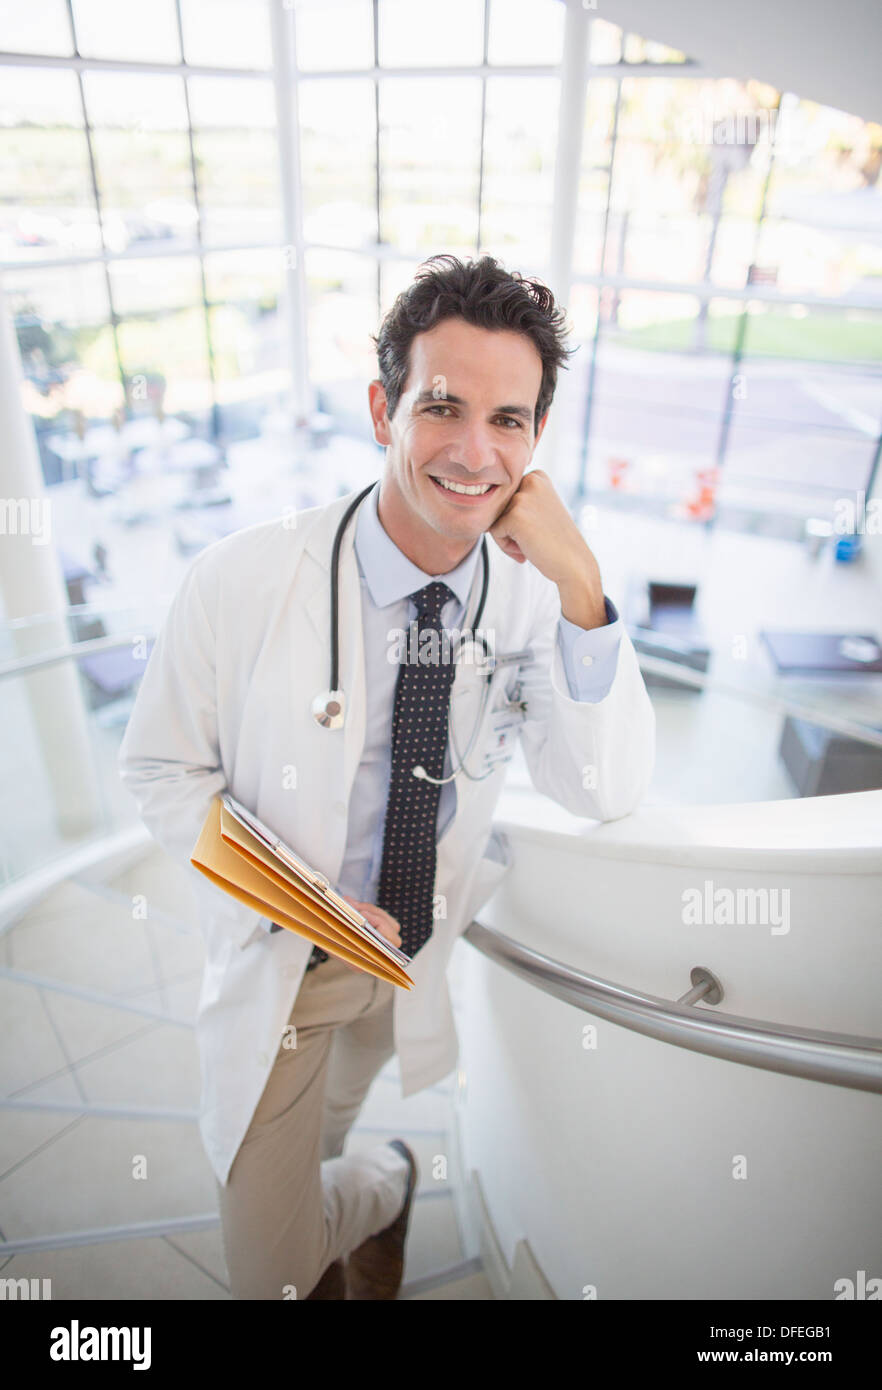 Portrait of smiling doctor on stairs in hospital Stock Photo